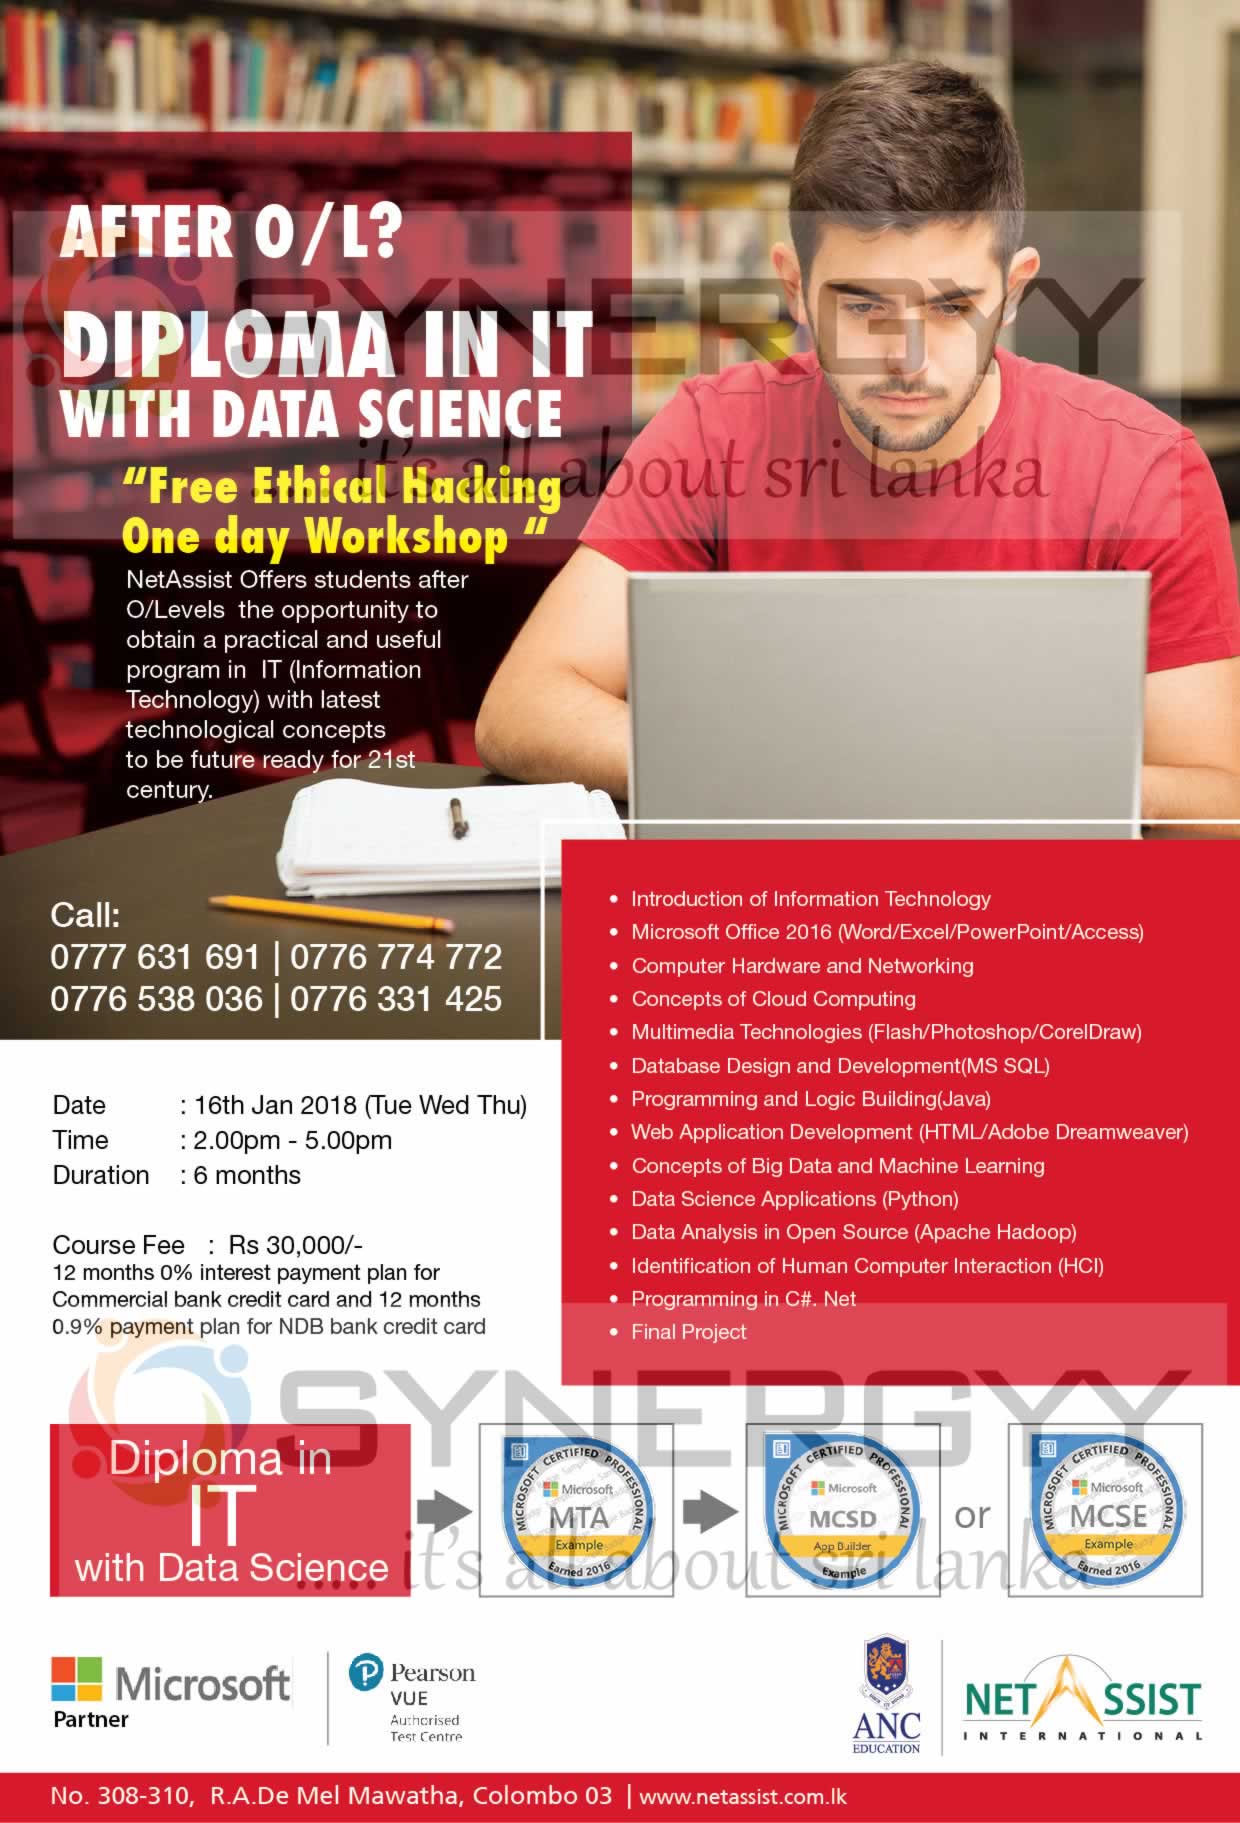 Diploma in IT with data science by Net Assist